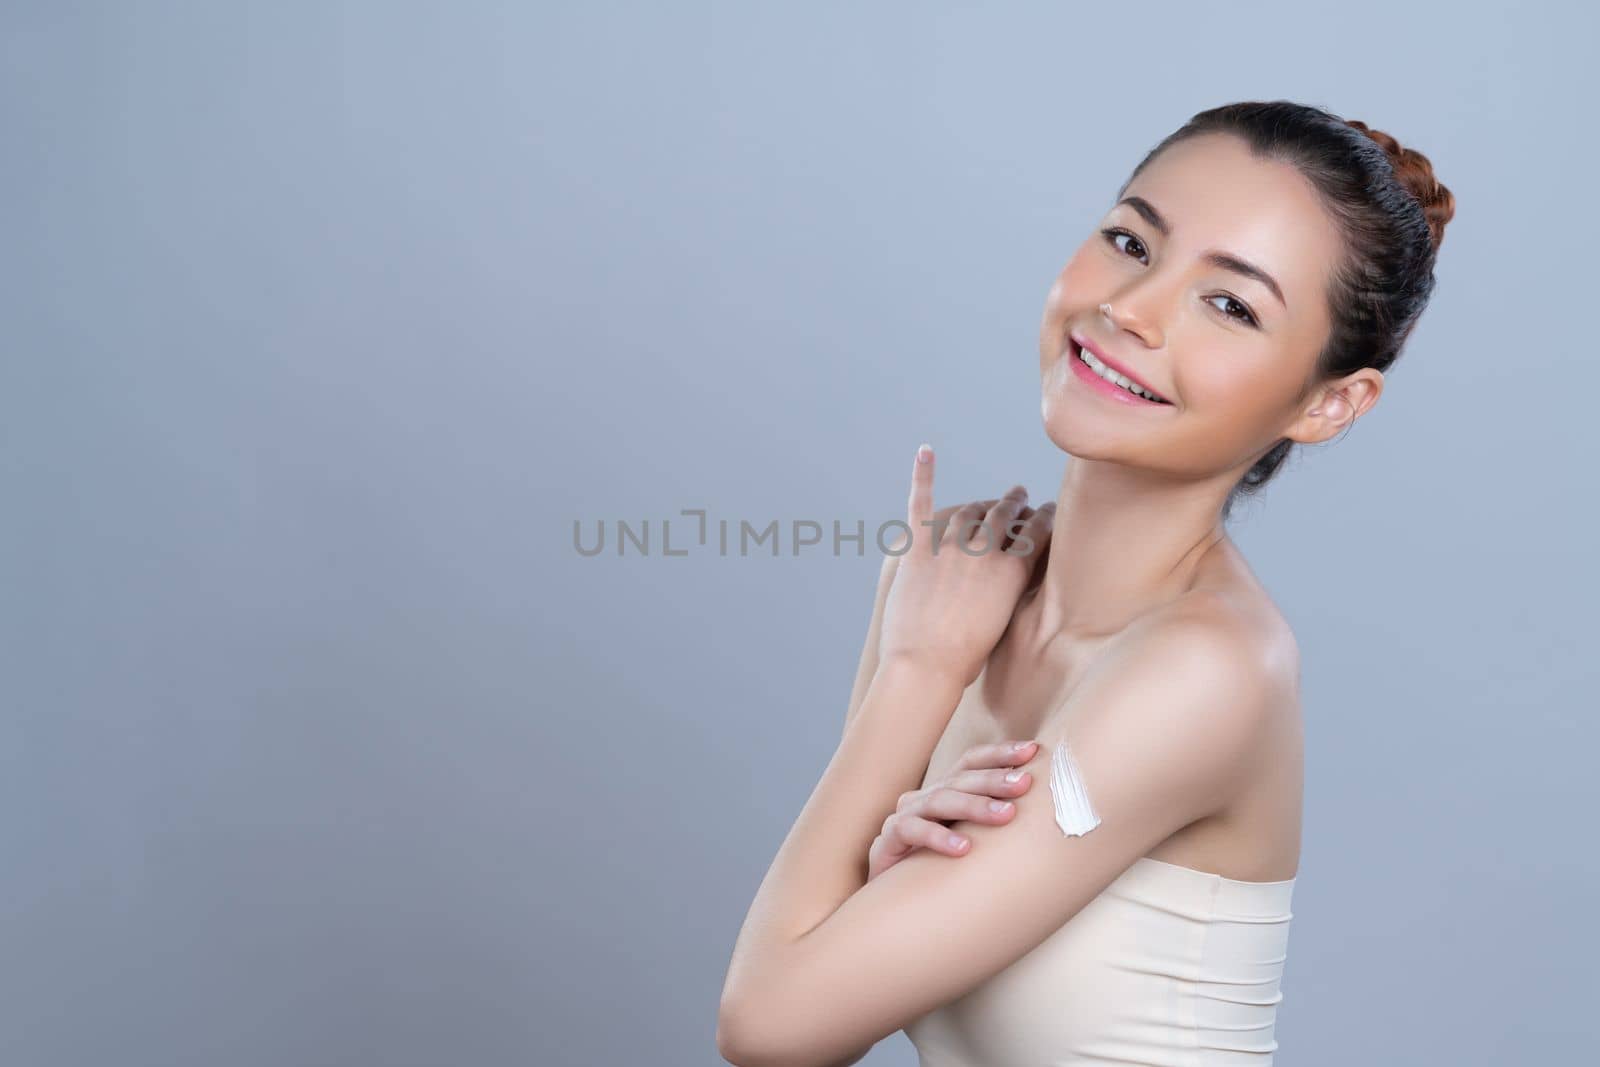 Glamorous beautiful woman applying moisturizer cream on her arm for perfect skincare treatment in isolated background. Soft makeup young girl portrait with skin rejuvenation and cosmetology concept.